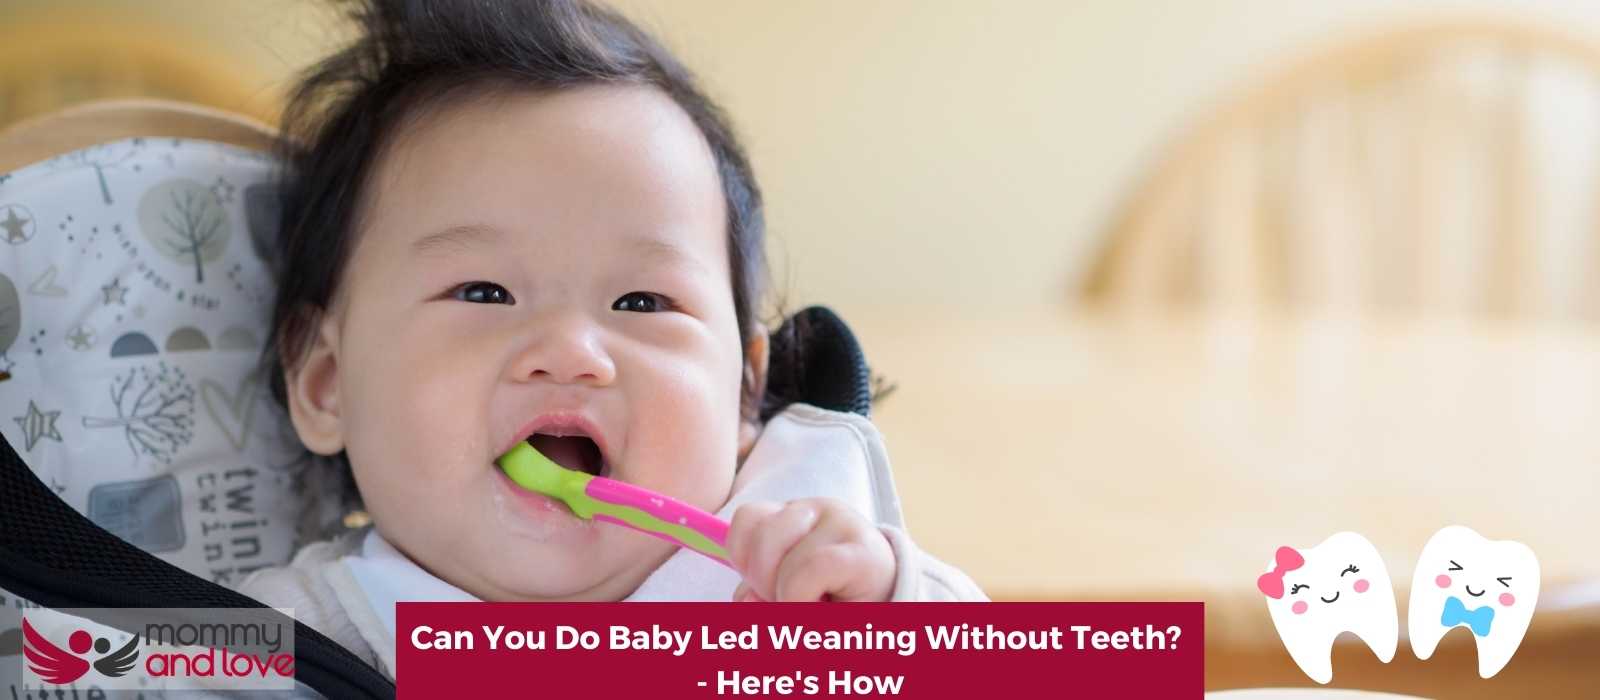 Can You Do Baby Led Weaning Without Teeth - Here's How